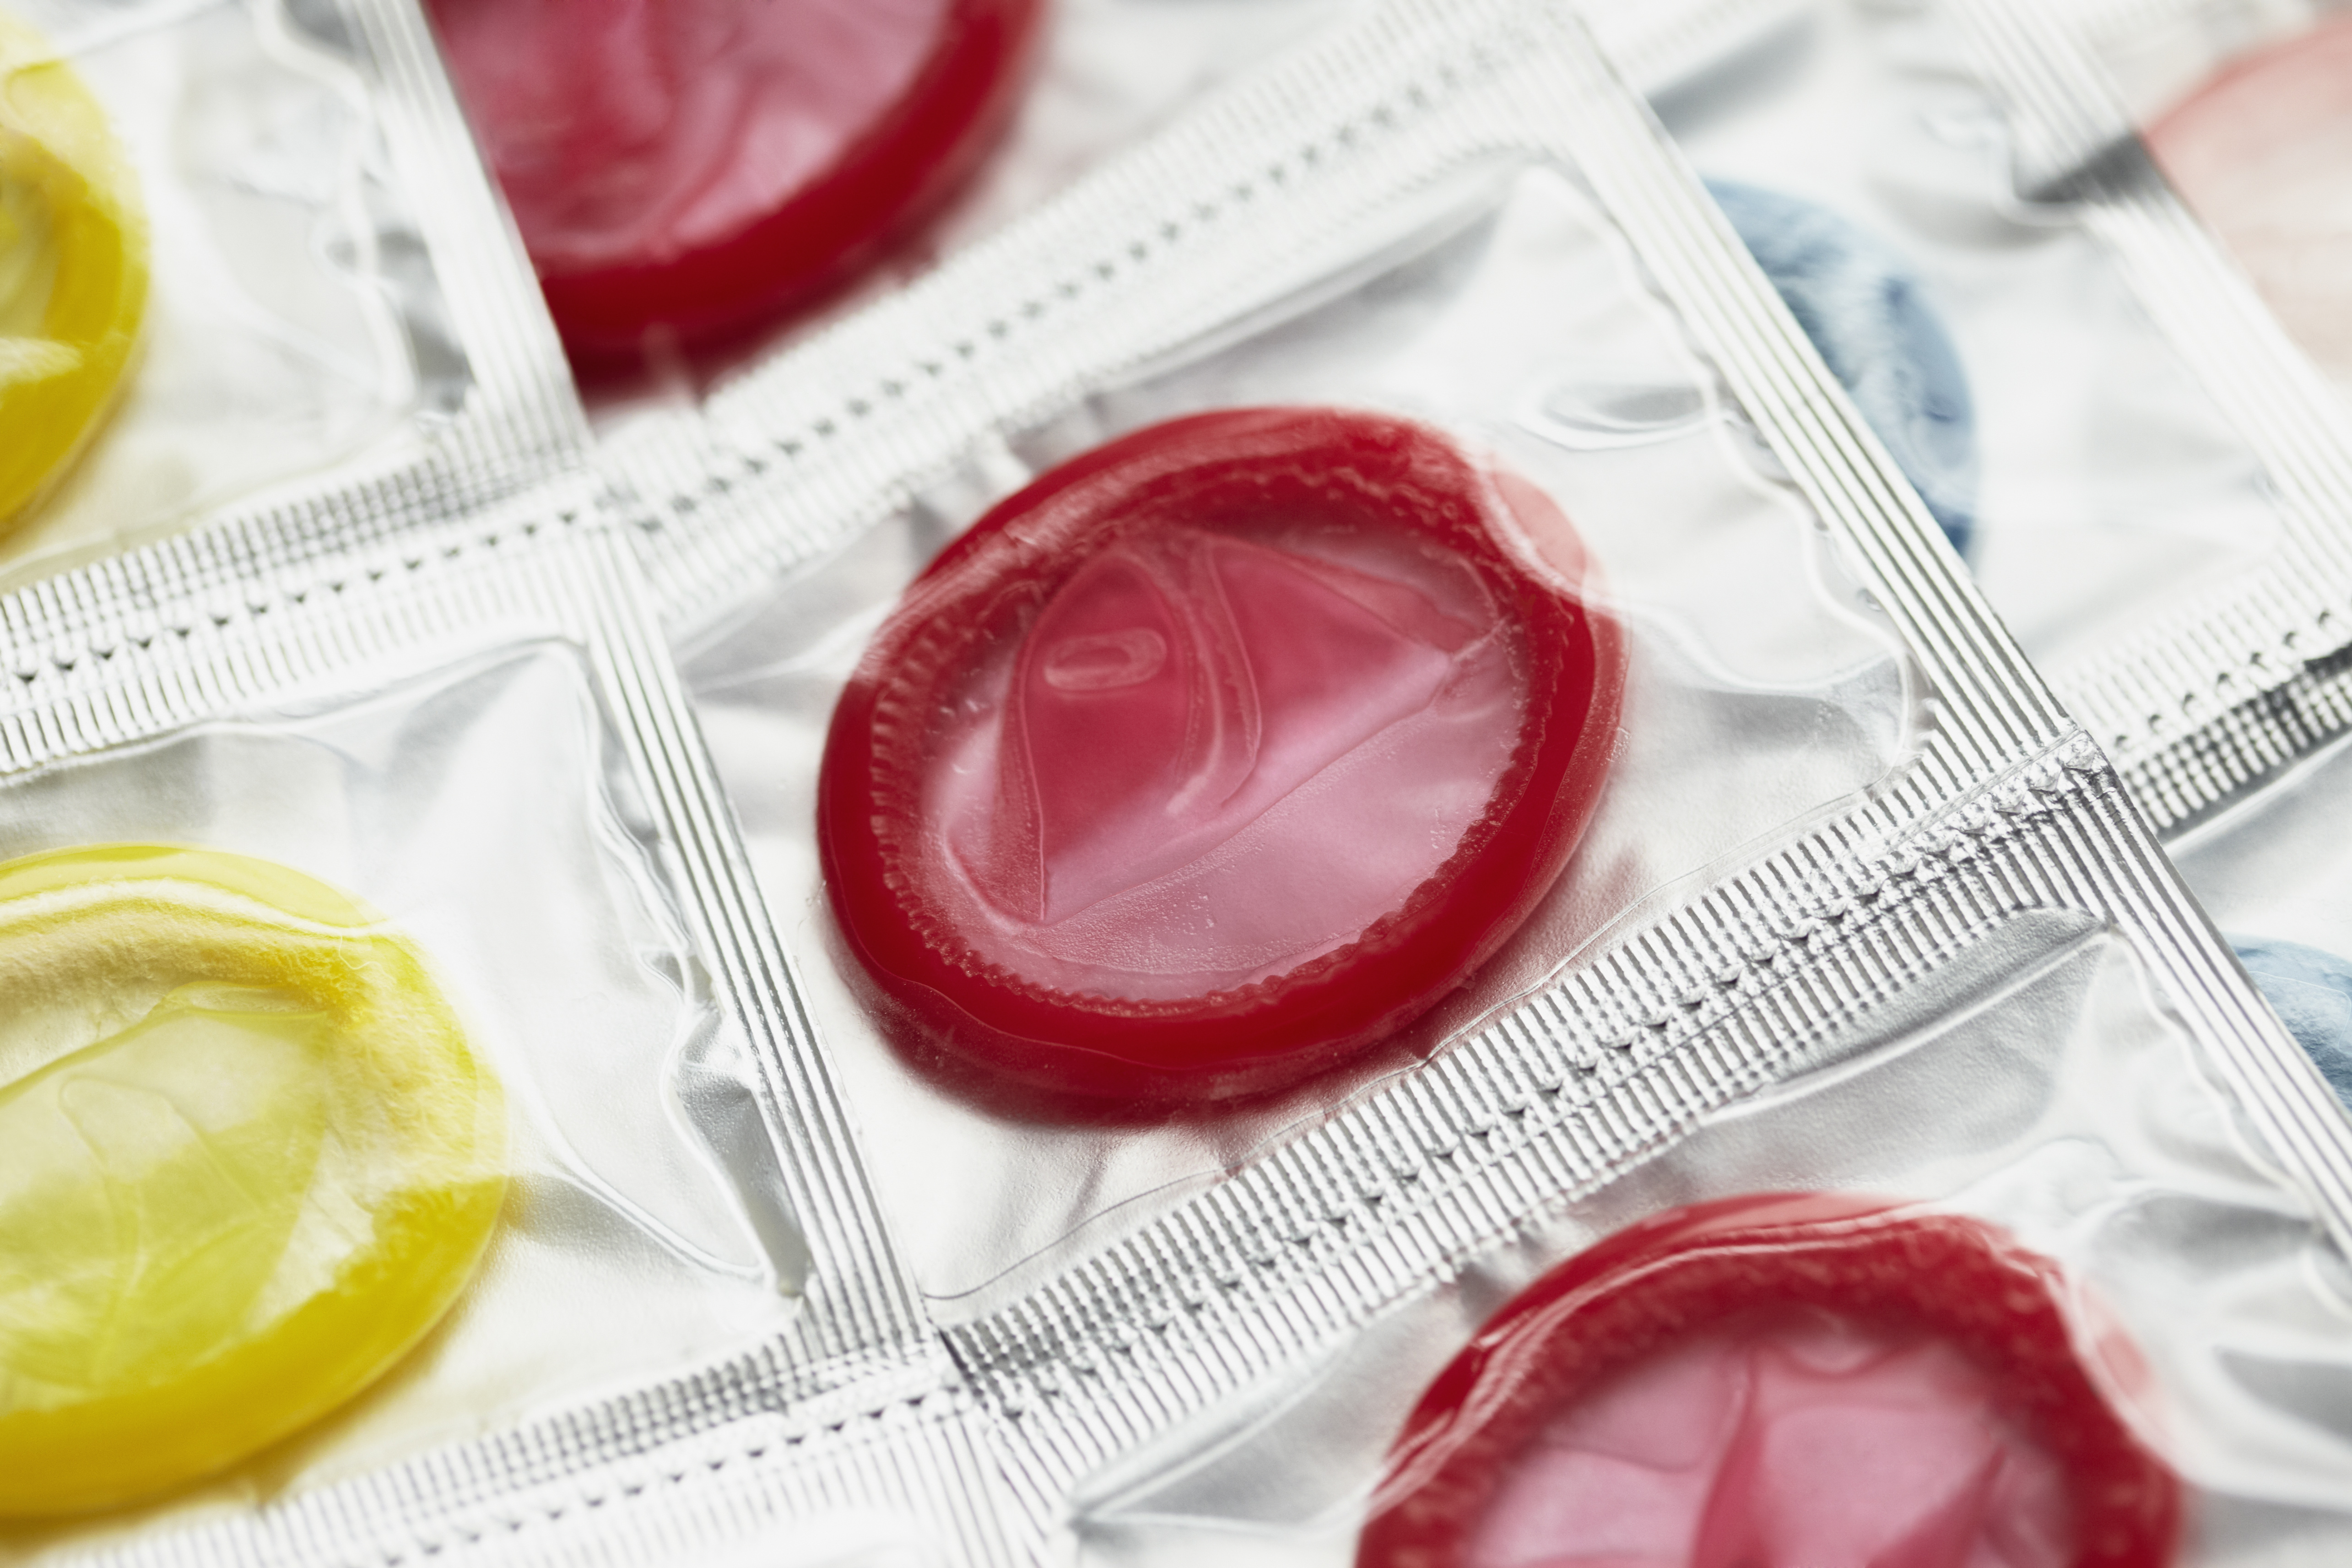 Couples In Committed Relationships Less Likely To Use Condoms Time